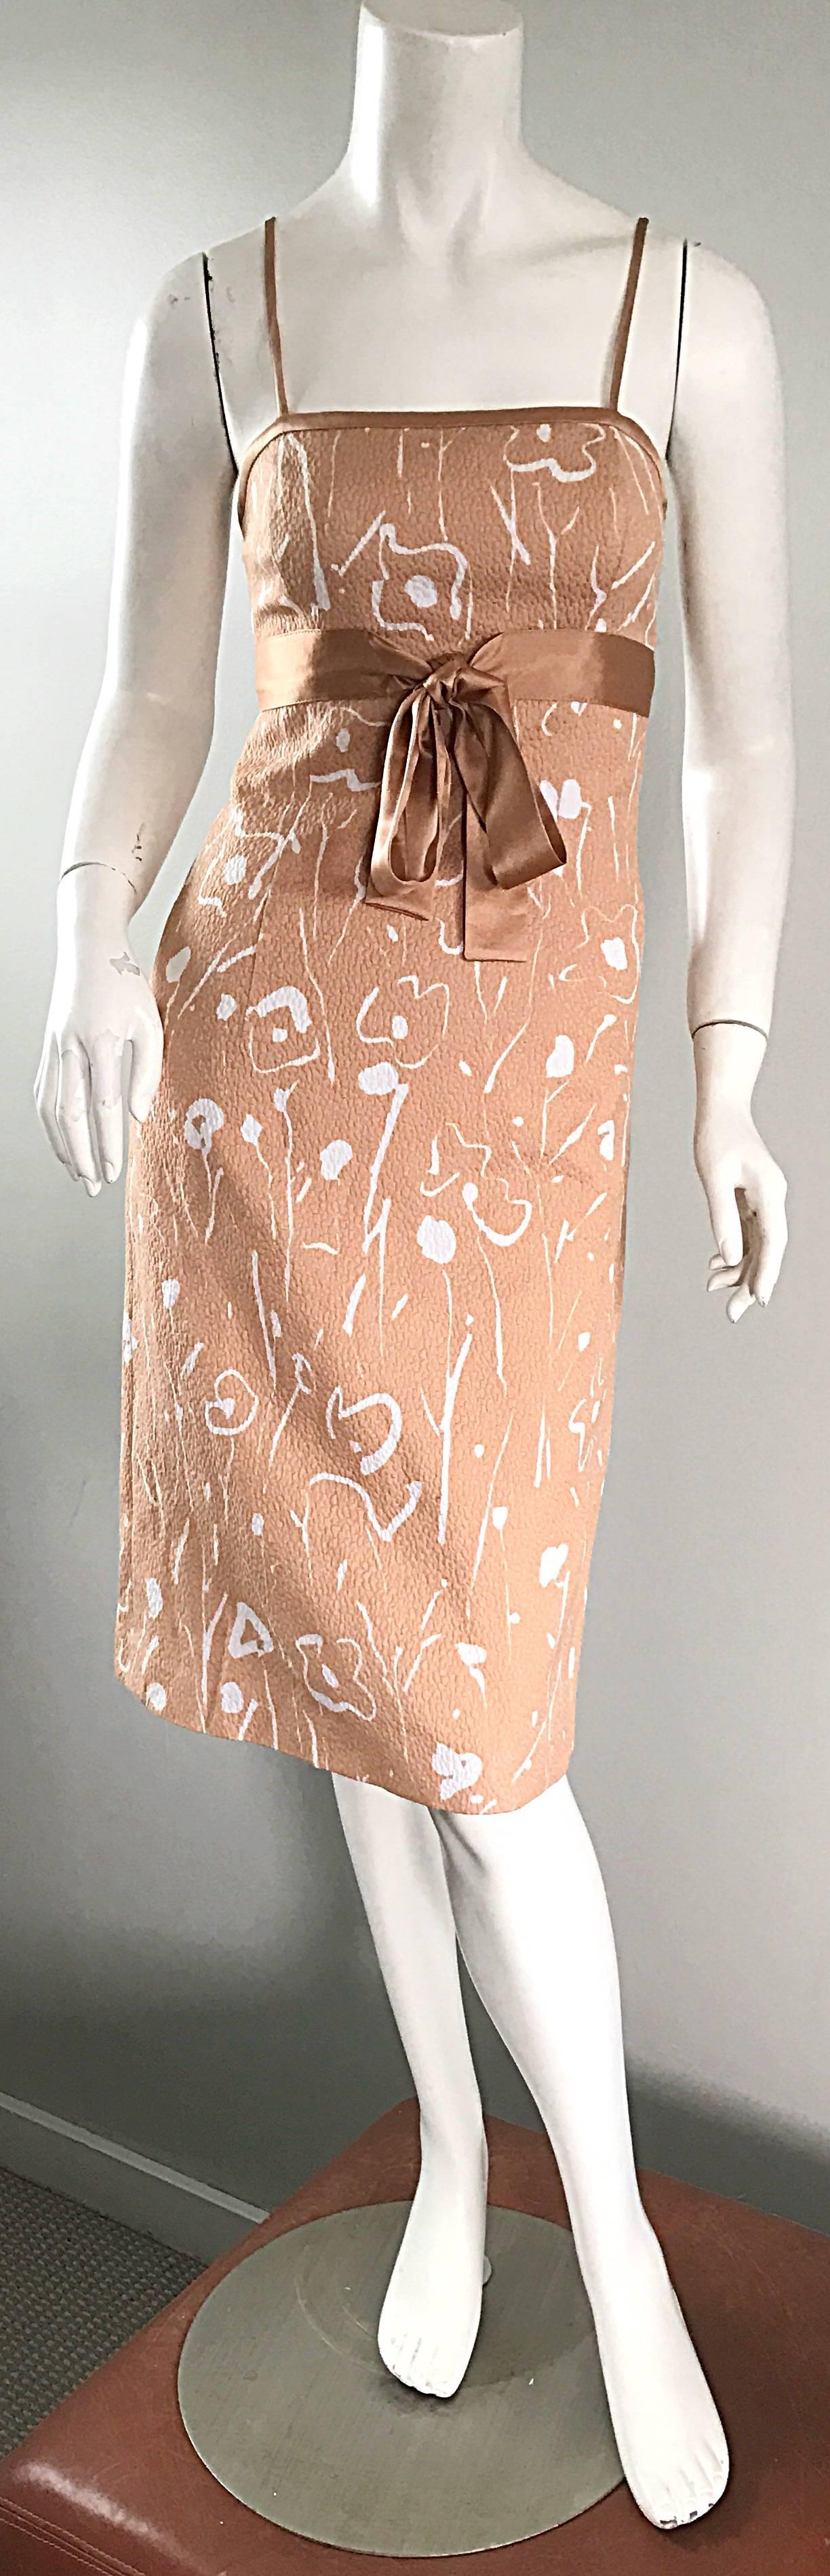 1990s Luca Luca Italian Peach Pink White Floral Abstract Silk Sleeveless Dress For Sale 3